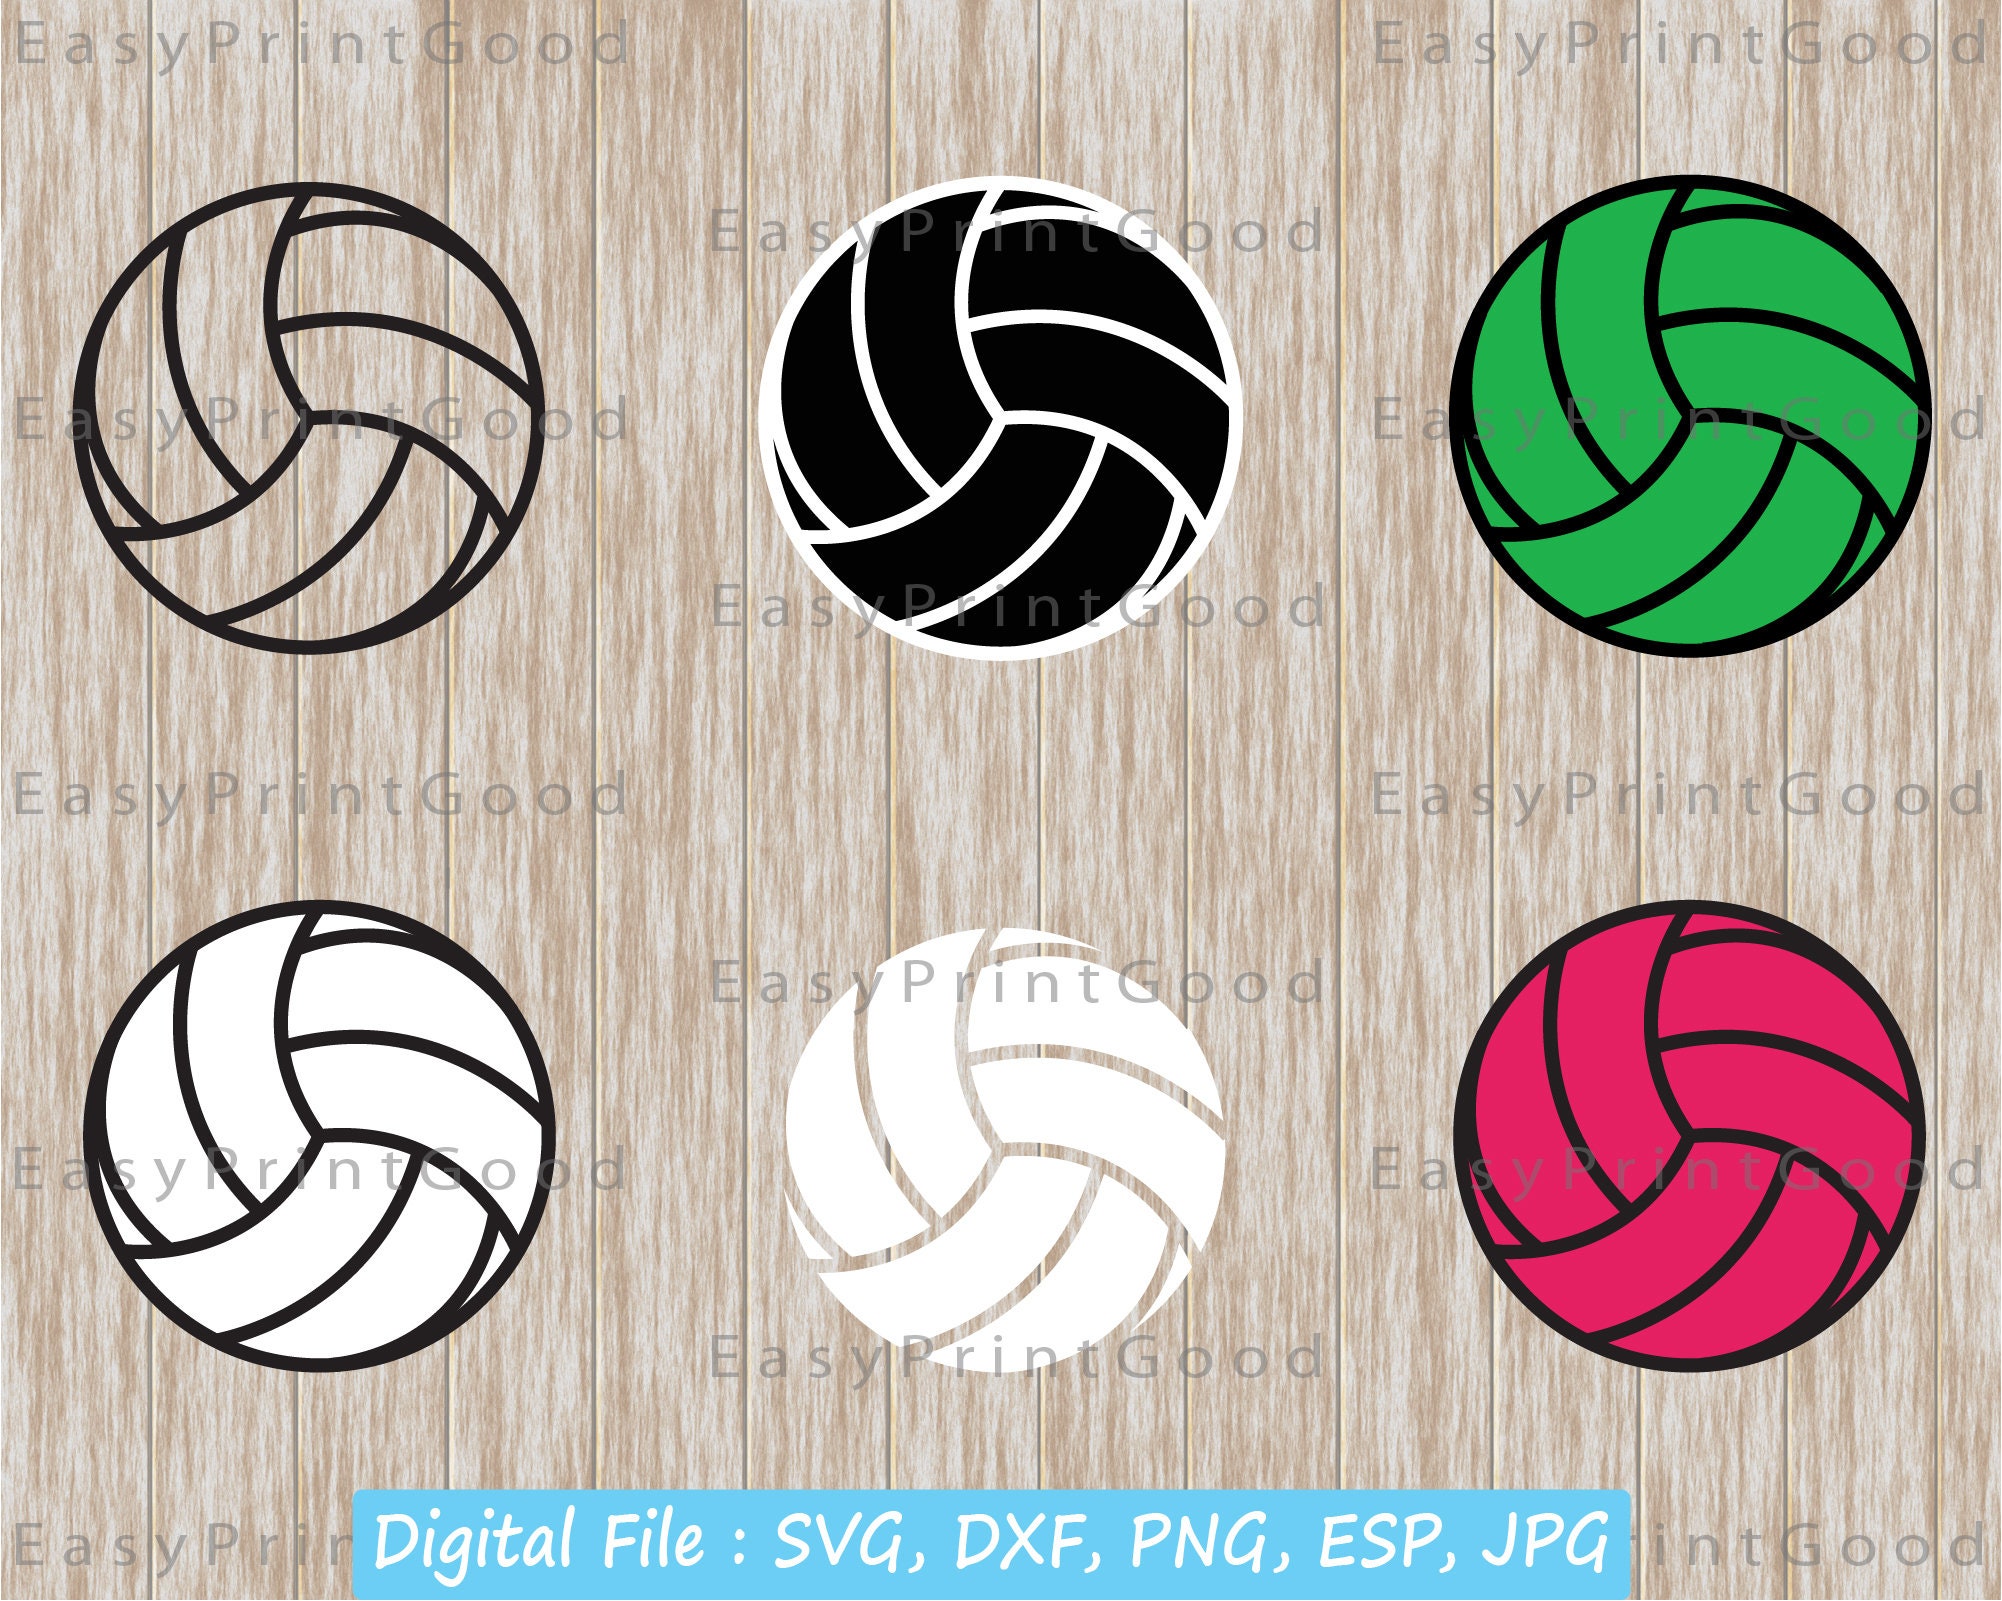 Download Volleyball Svg Volleyball Vector Volleyball Clipart Volleyball Monogram Svg Volleyball Digital Volleyball Silhouette Cut File Cricut